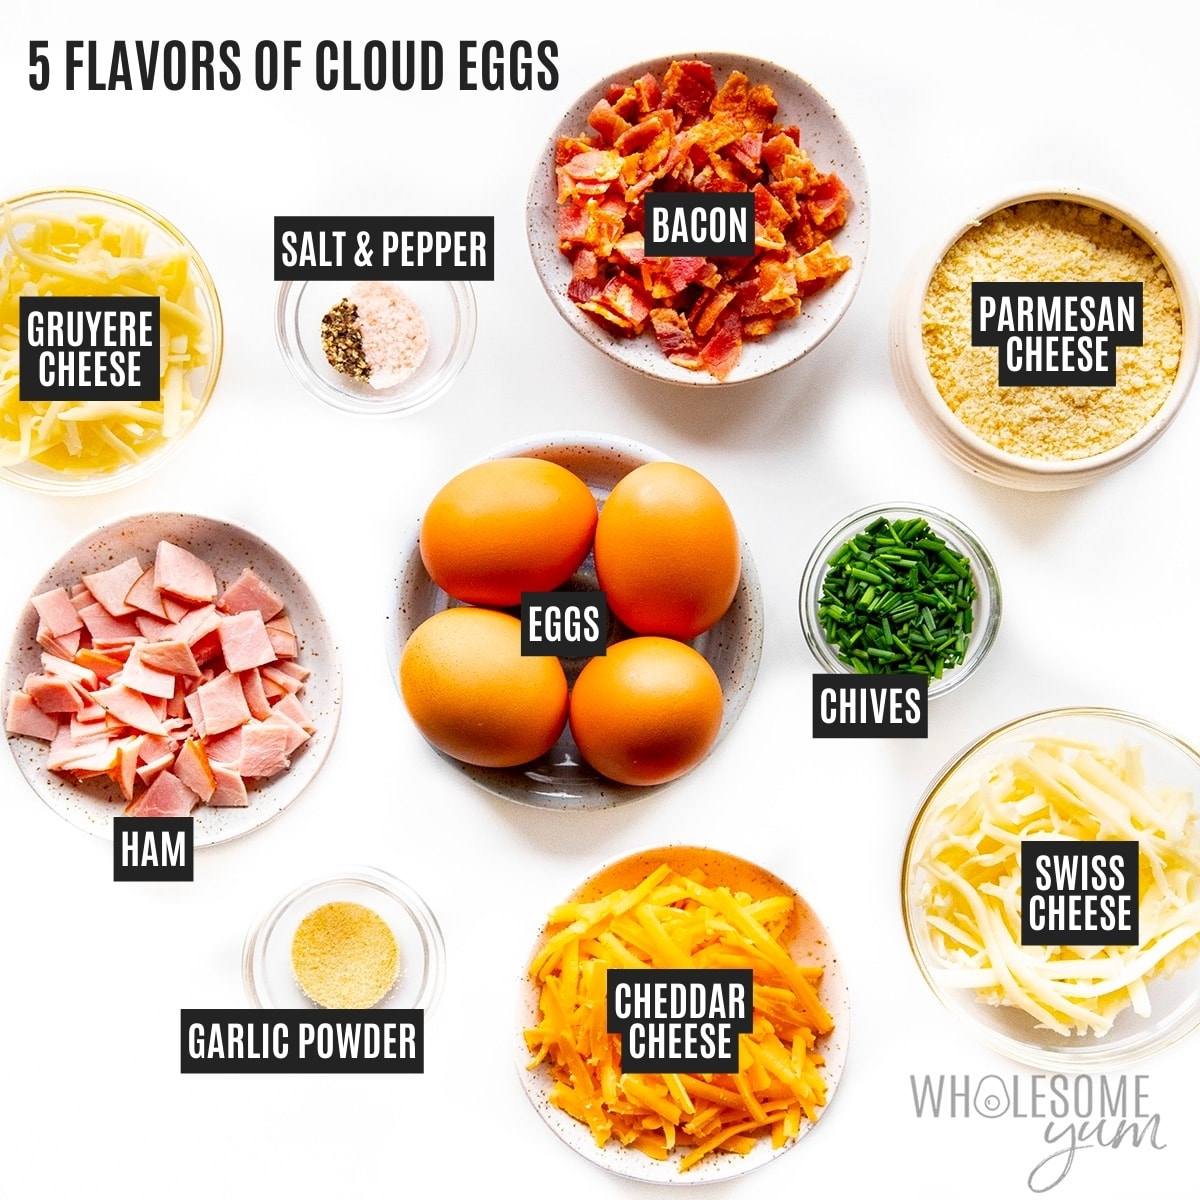 Cloud eggs ingredients for different flavors.